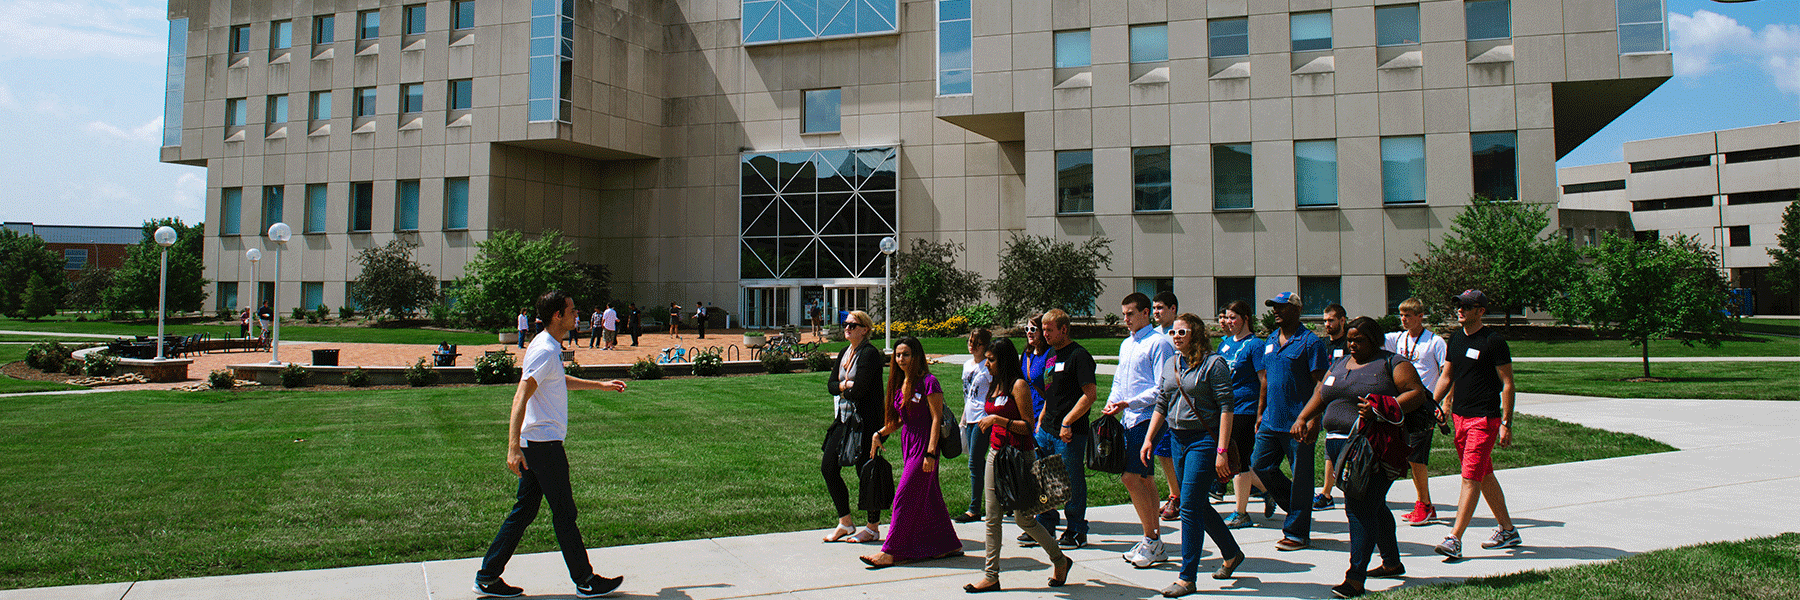 Students touring campus.